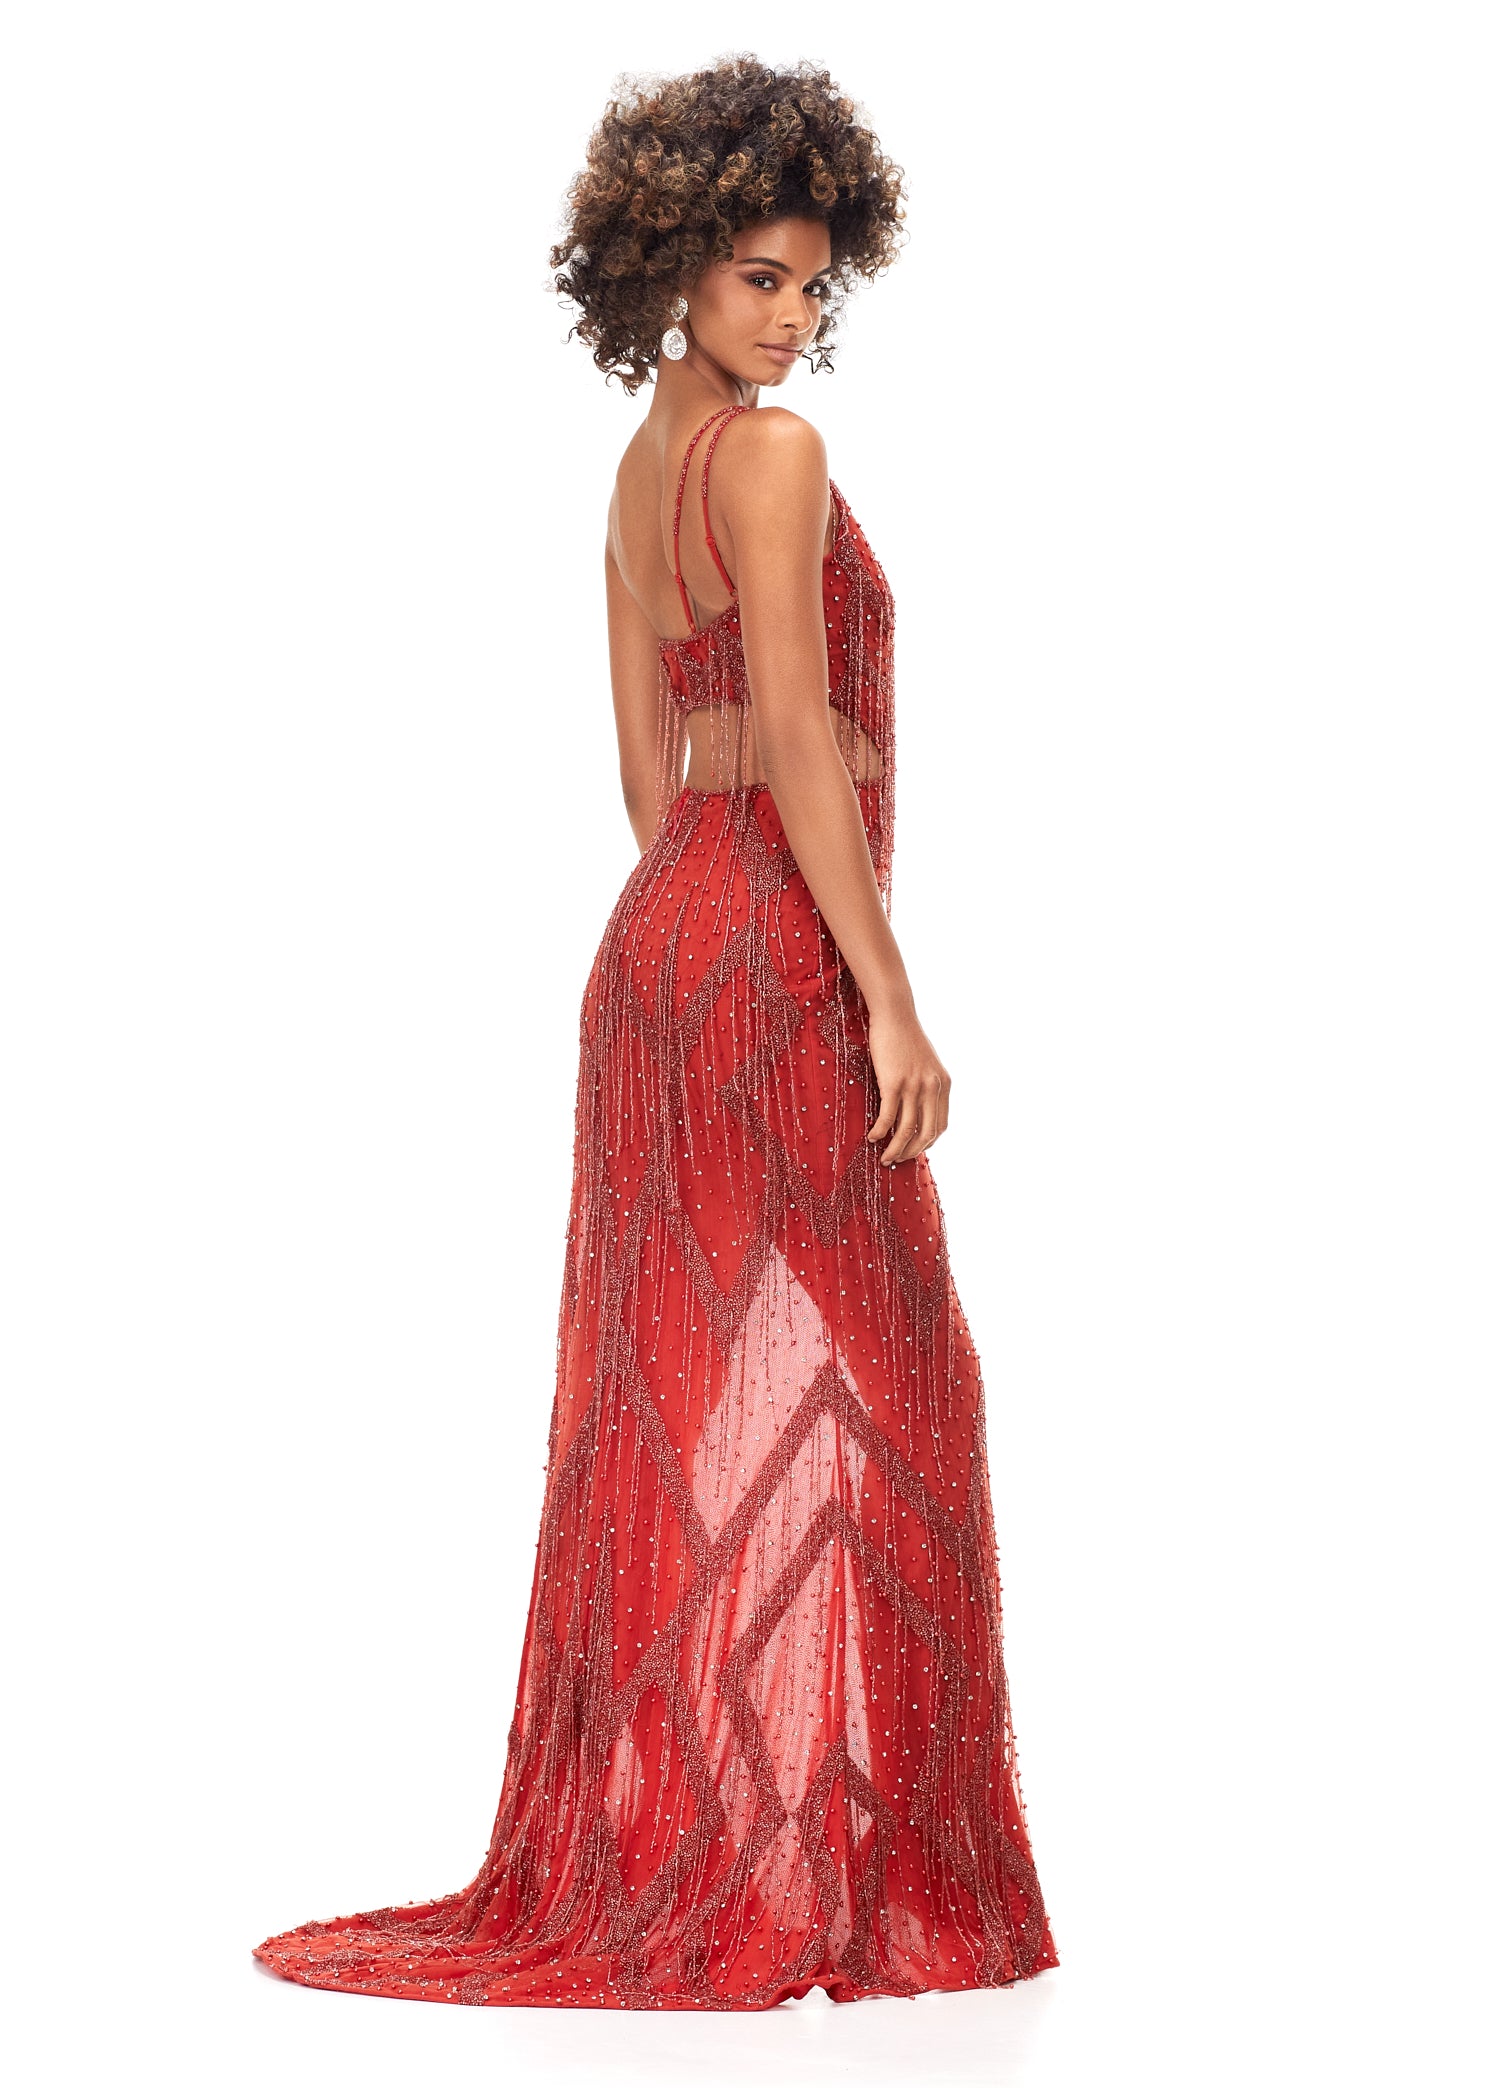 Ashley Lauren 11280 This daringly different one shoulder beaded gown features an intricate bead pattern with scattered fringe throughout. The look is complete with side cut outs and a side left leg slit. One Shoulder Cut Outs Fringe Accents Fully Beaded COLORS: Turquoise, Orange, Black